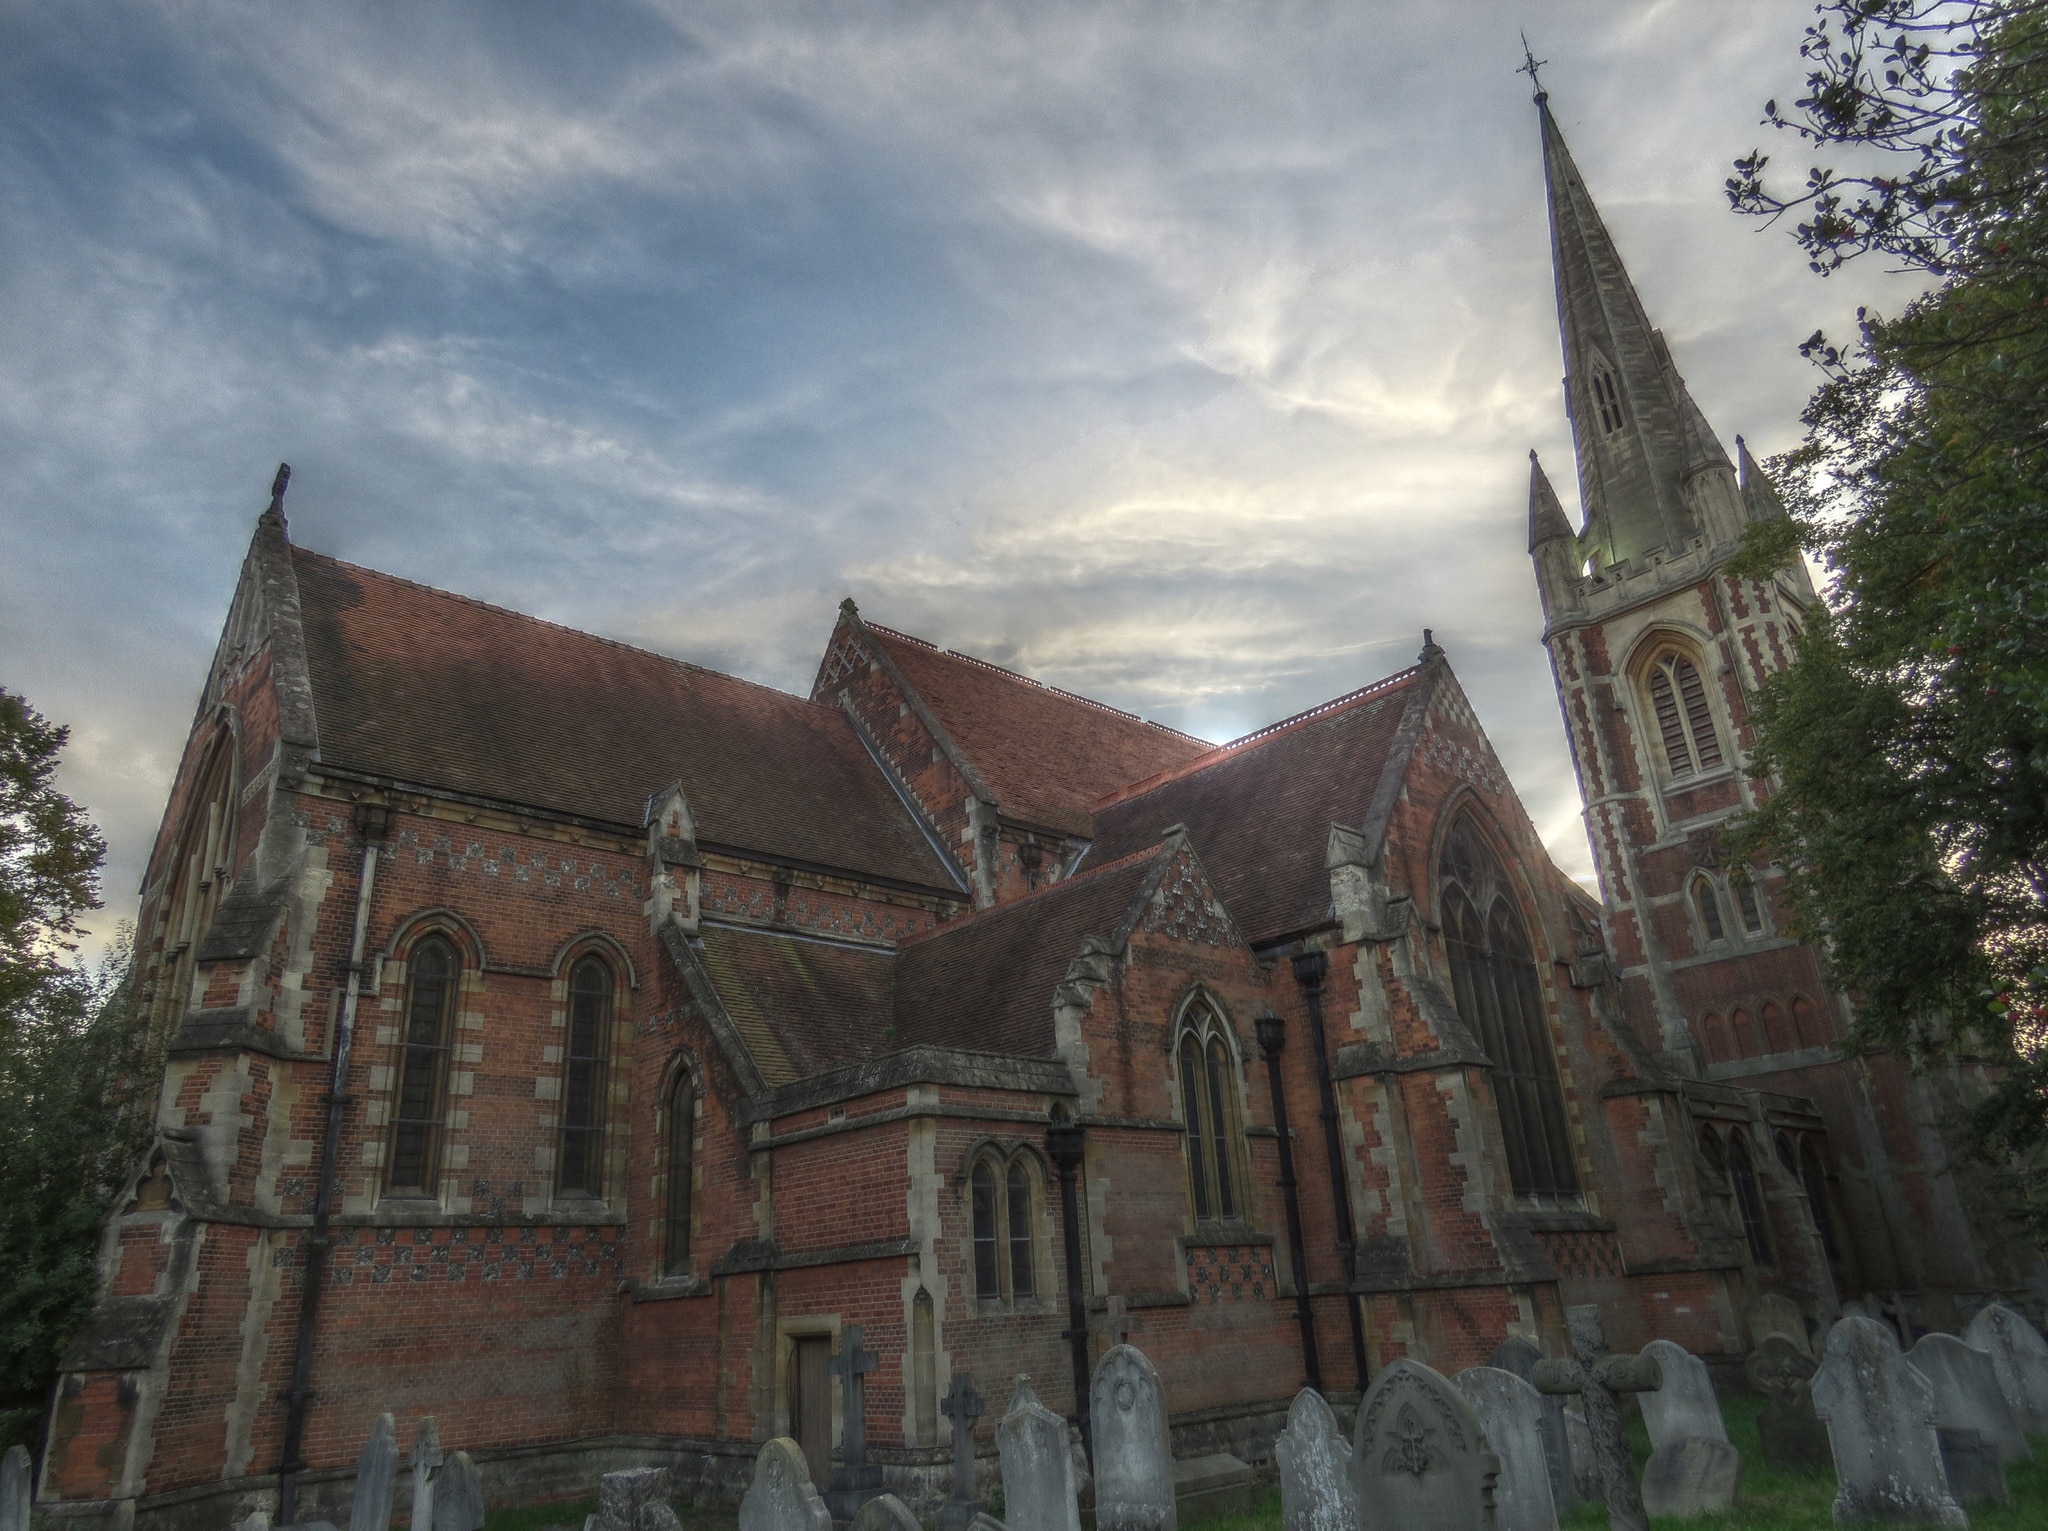 HDR composite photograph of St Mary's Church, Slough